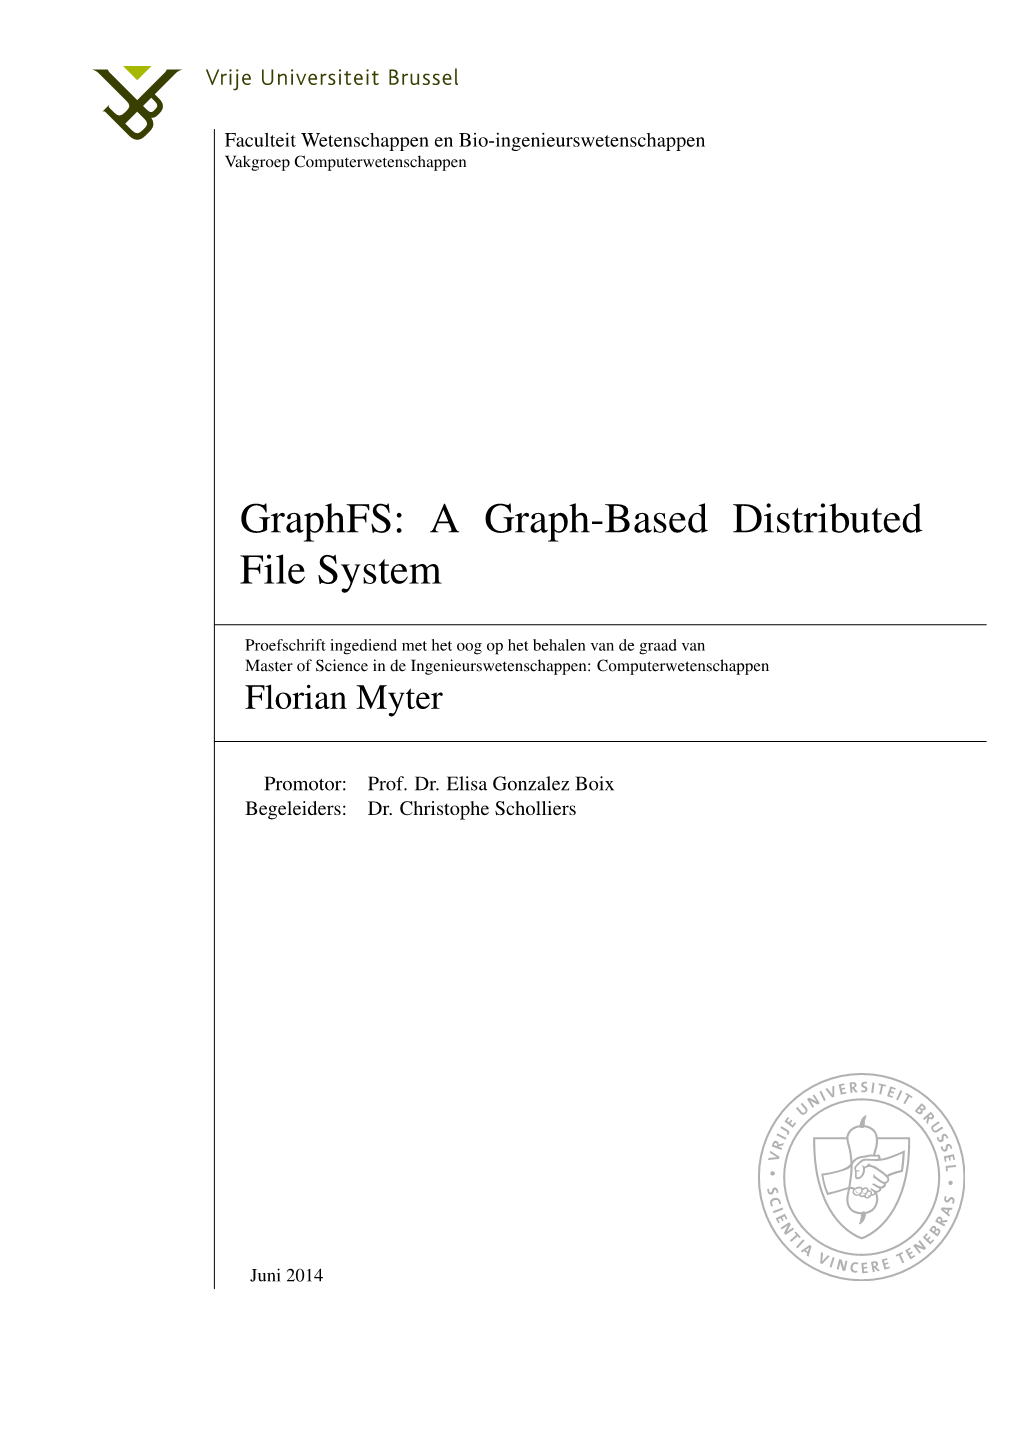 A Graph-Based Distributed File System